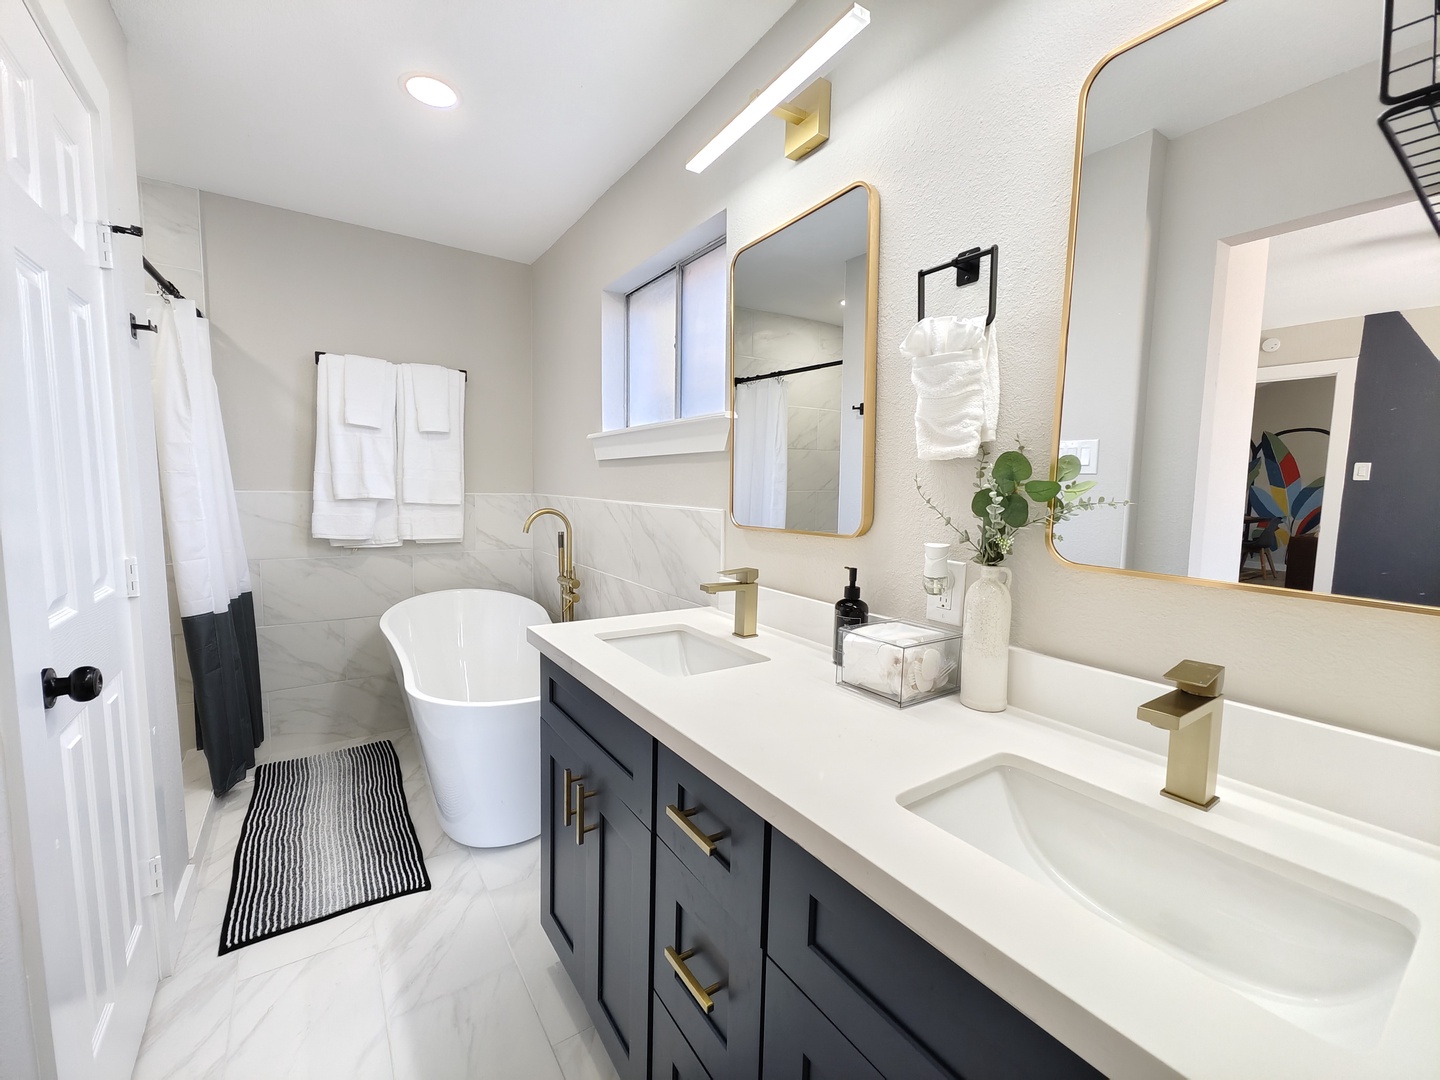 This ensuite features a dual vanity, shower, & luxurious soaking tub